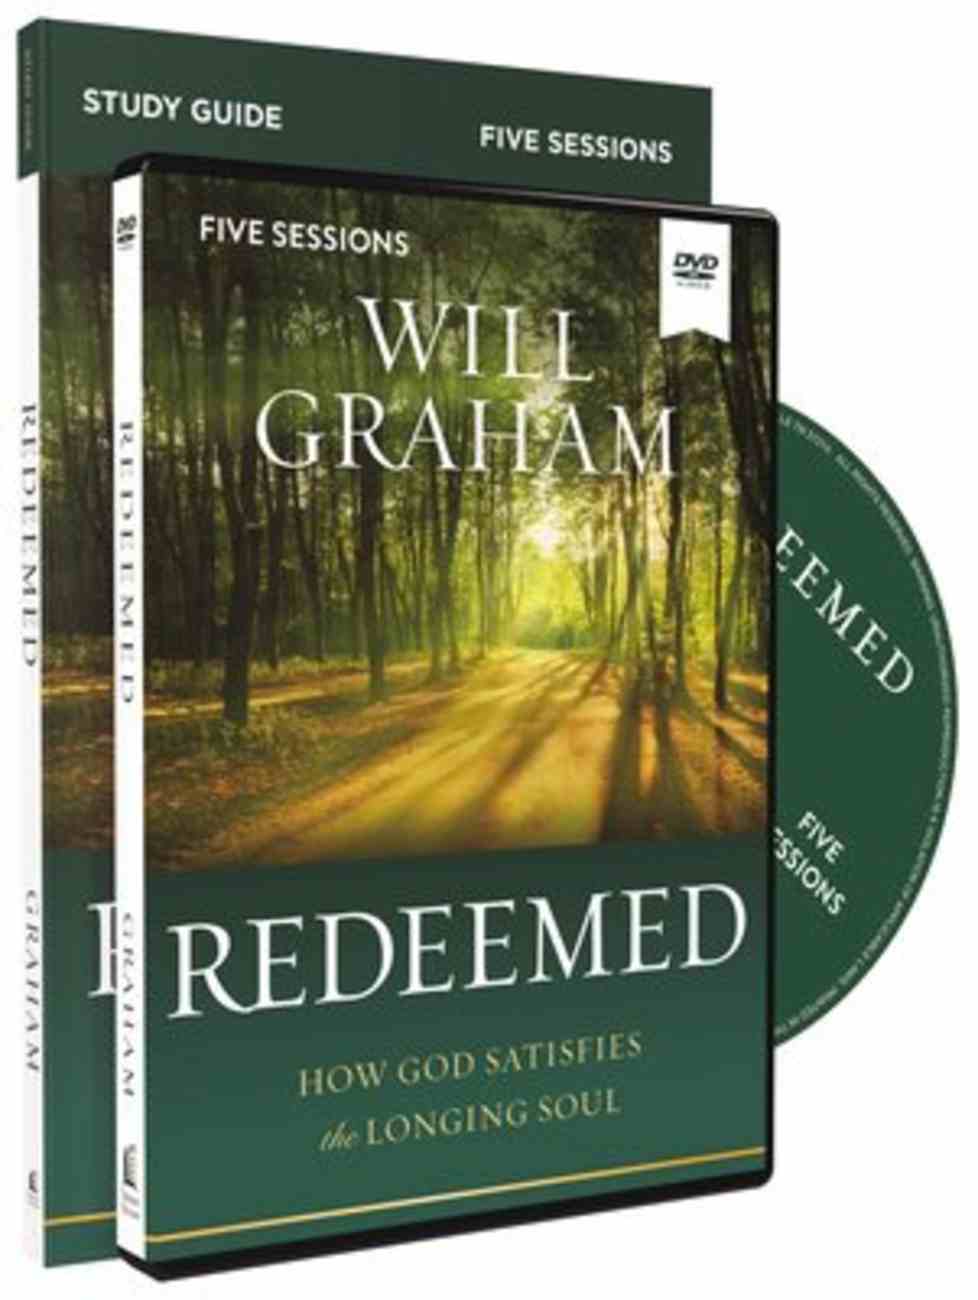 Redeemed: How God Satisfies the Longing Soul (Study Guide With Dvd) Pack/Kit